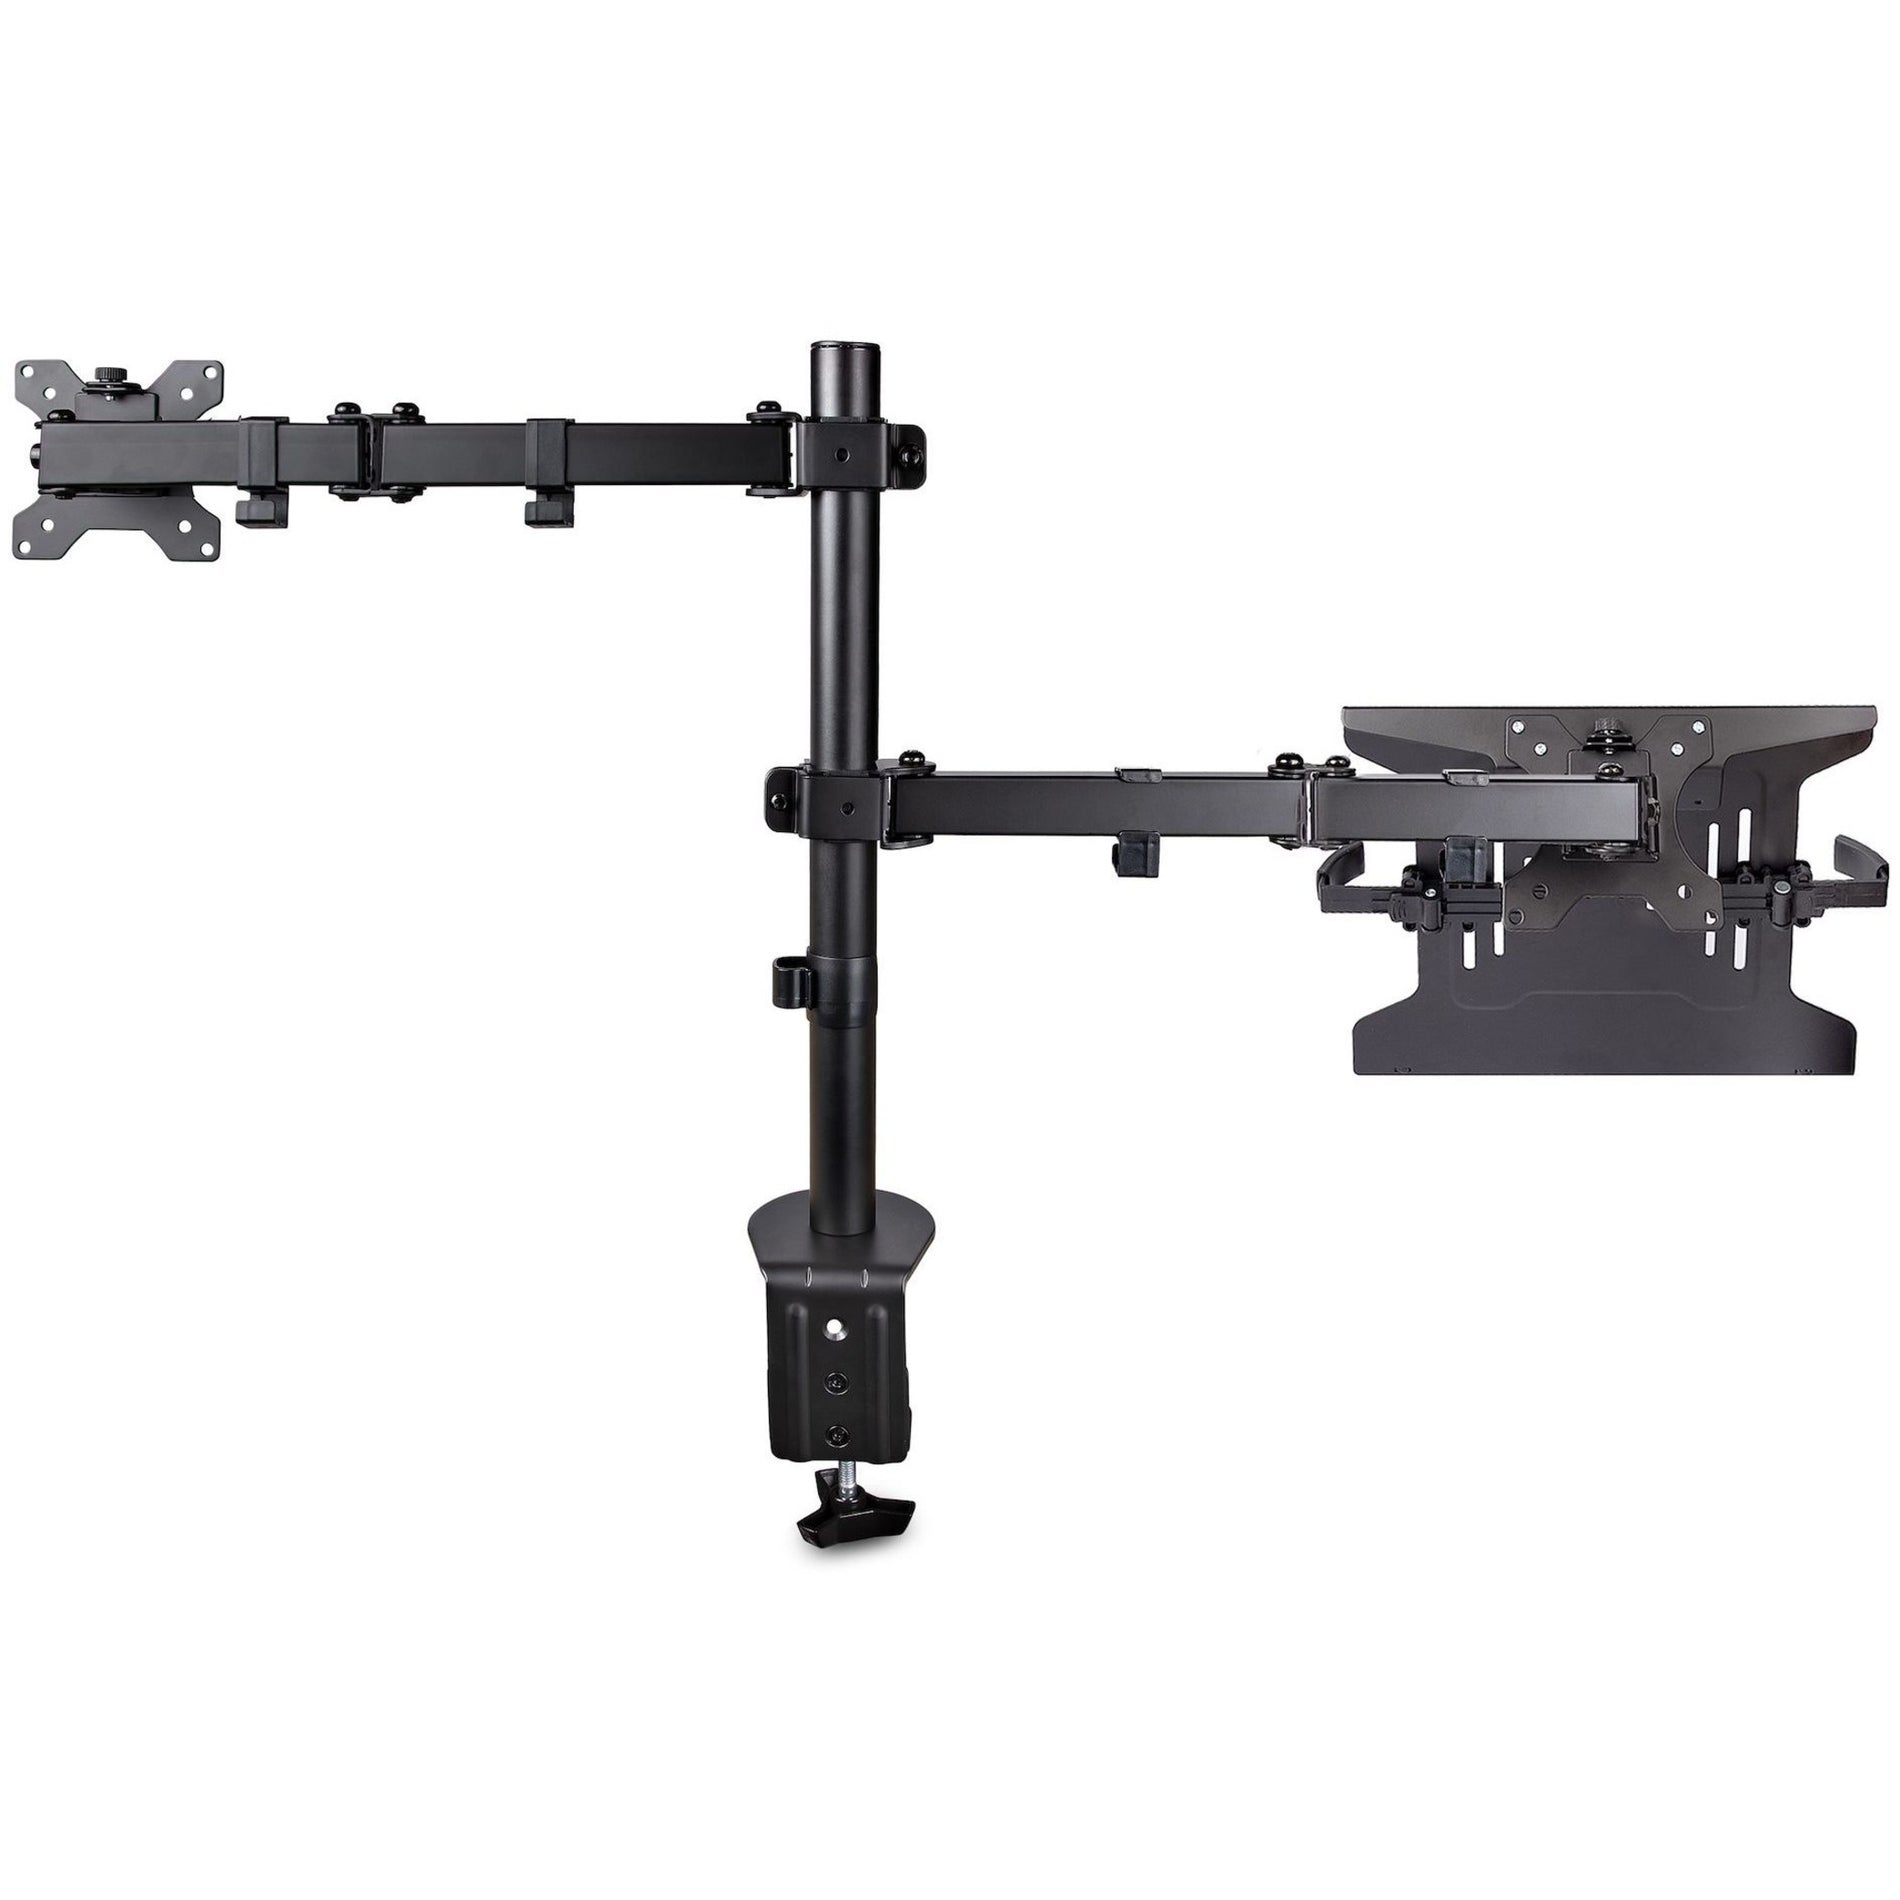 StarTech.com A2-LAPTOP-DESK-MOUNT Monitor Arm with Laptop Tray, Adjustable - Ergonomic Desk Mount for Notebook and Display